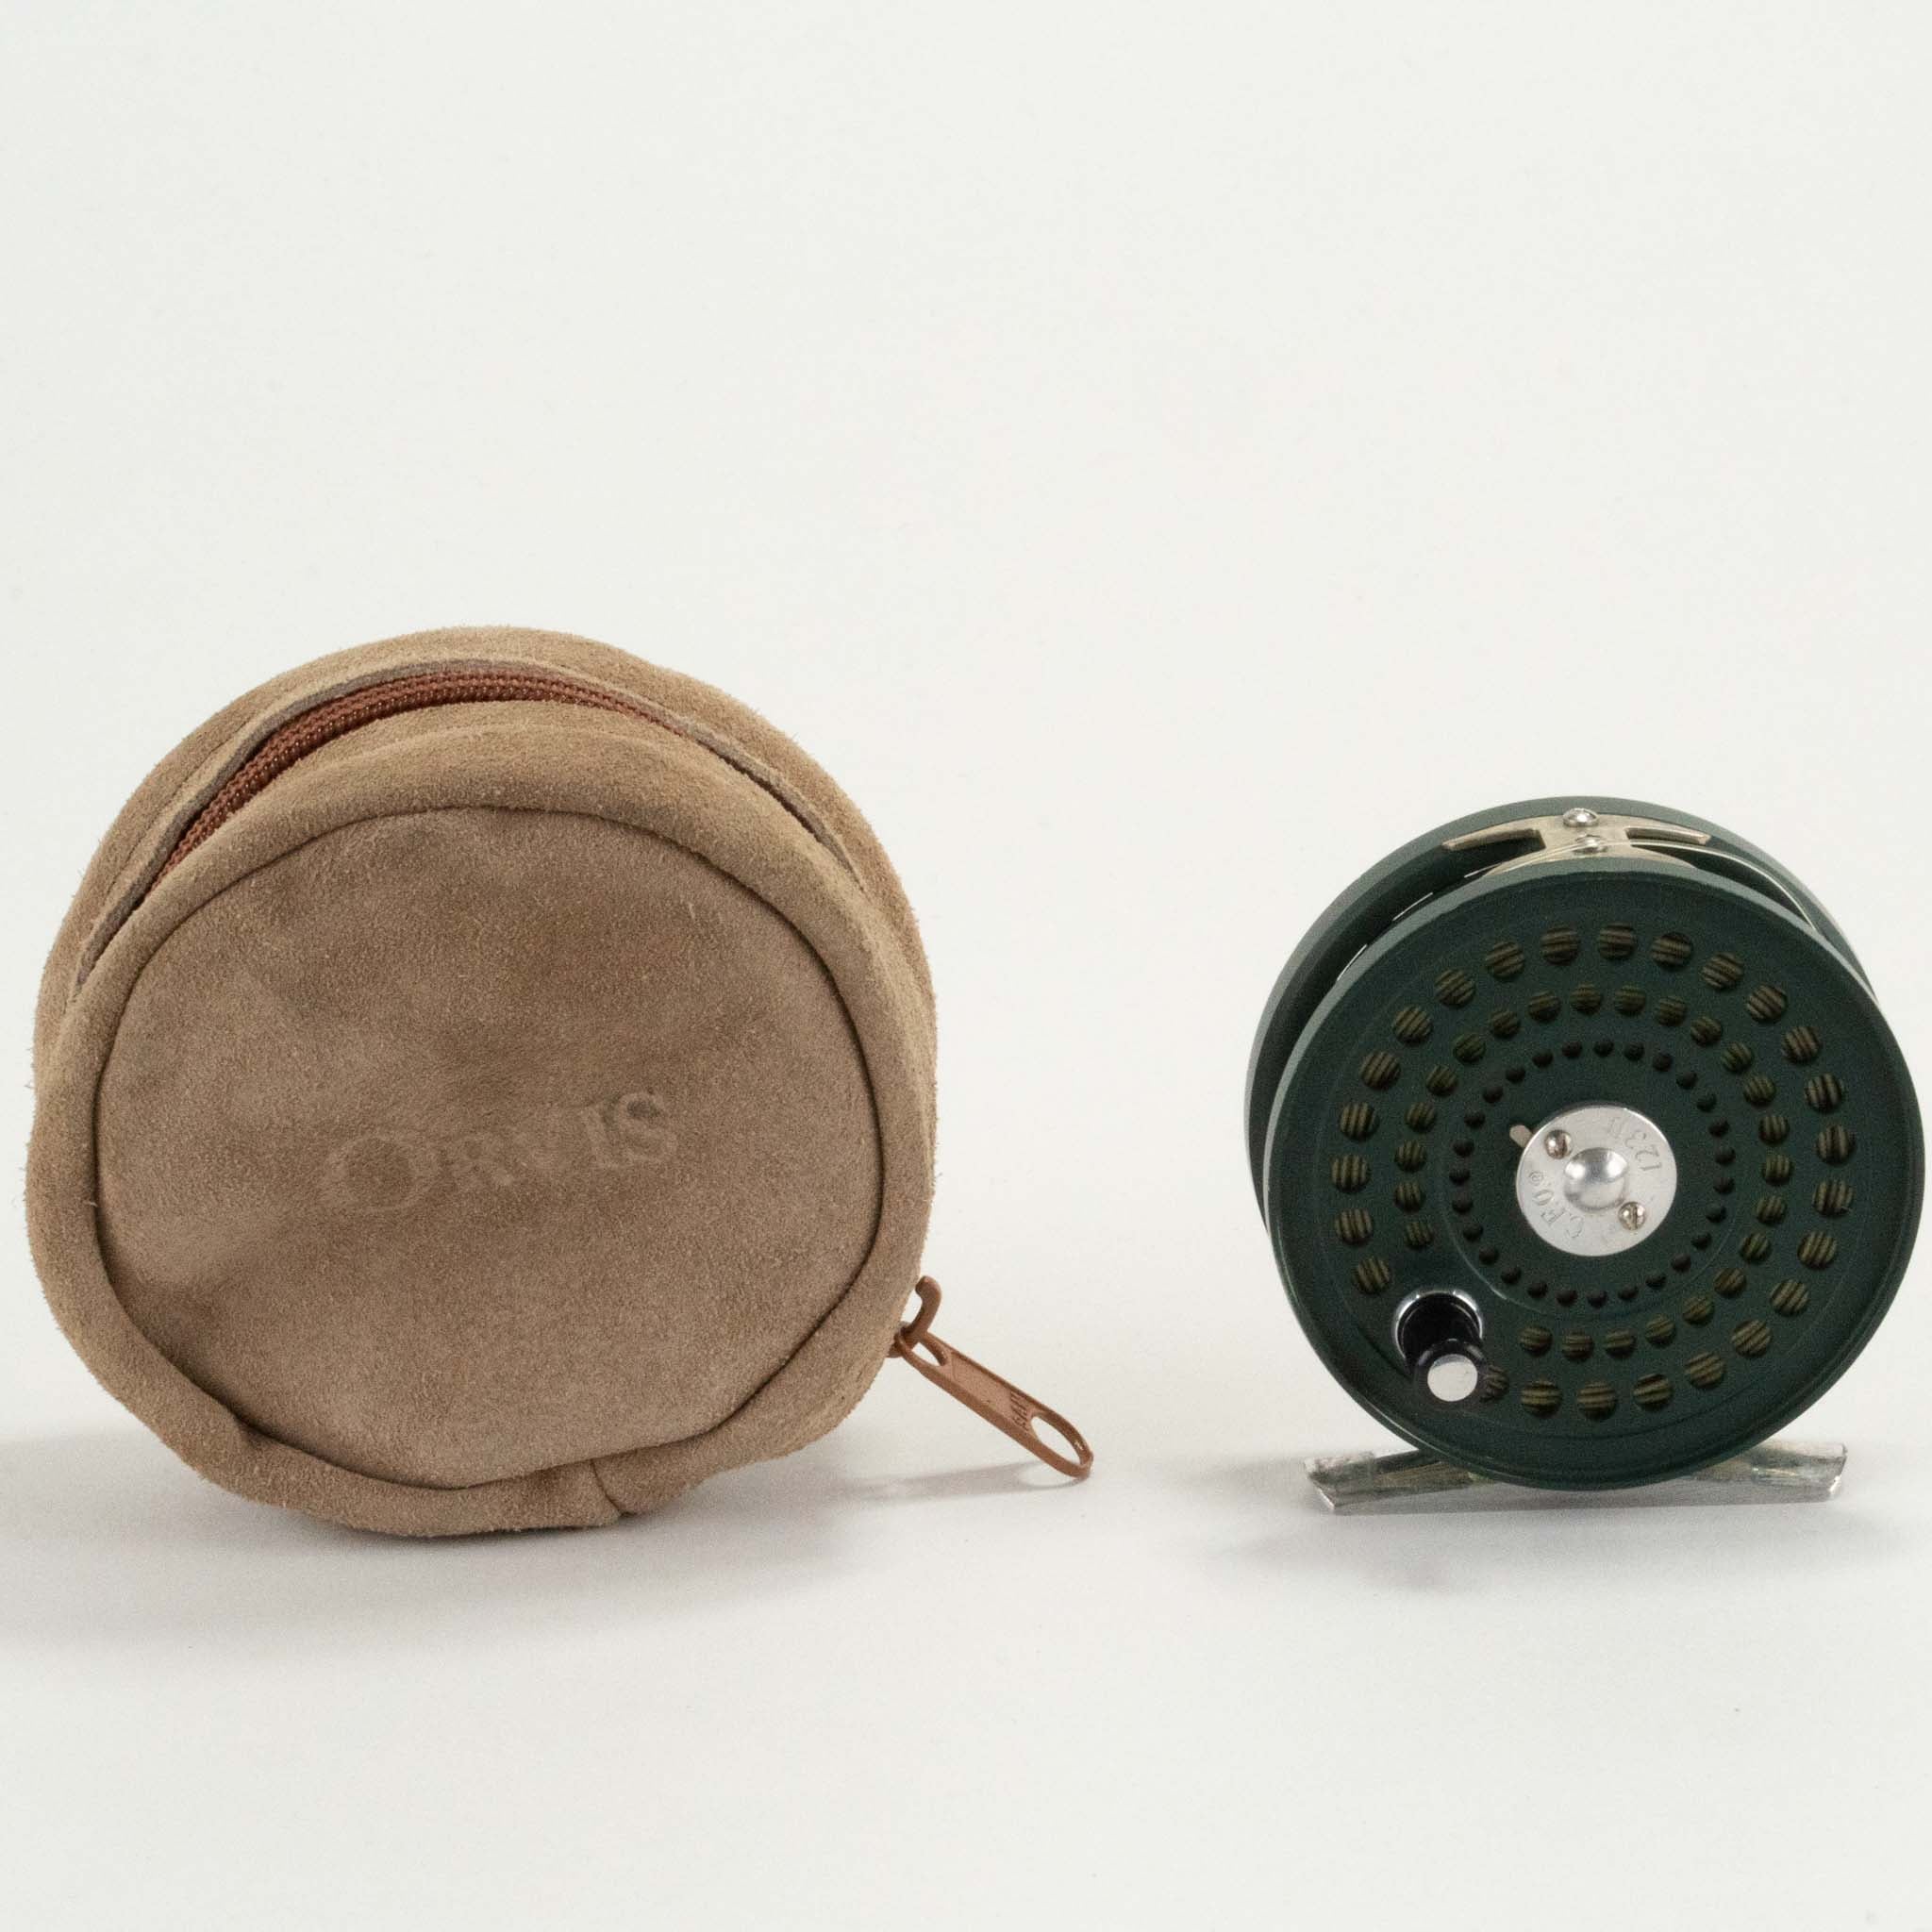 Orvis CFO 123 Disc Fly Reel 1-2-3 LHR – Outfishers